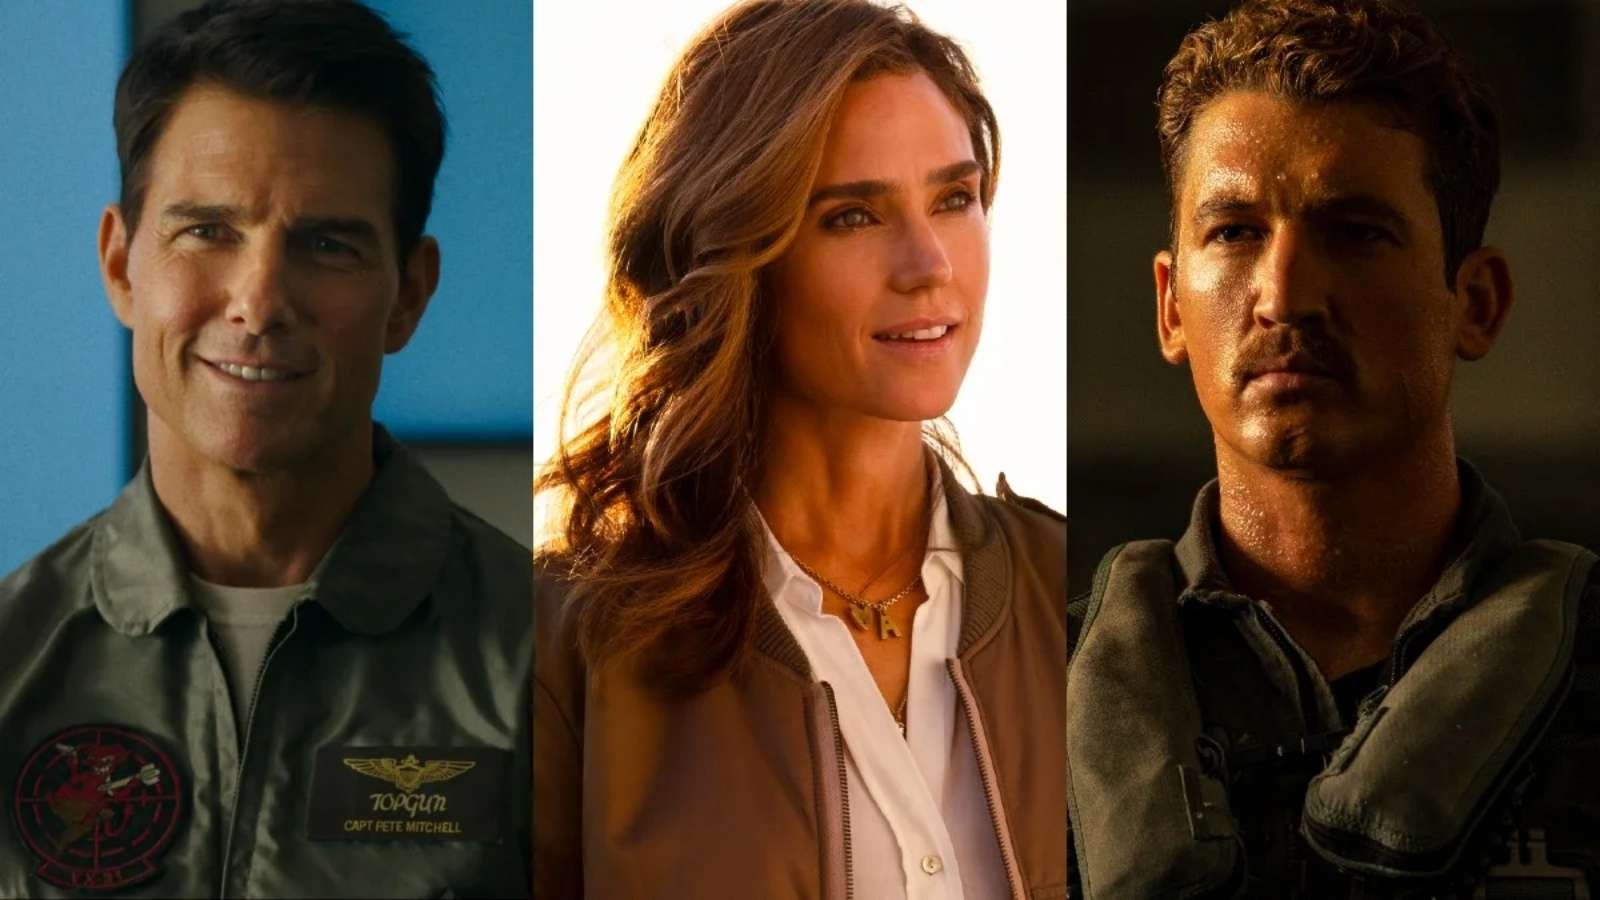 Top Gun: Maverick – Cast, Storyline, Characters, and Where They Are Now